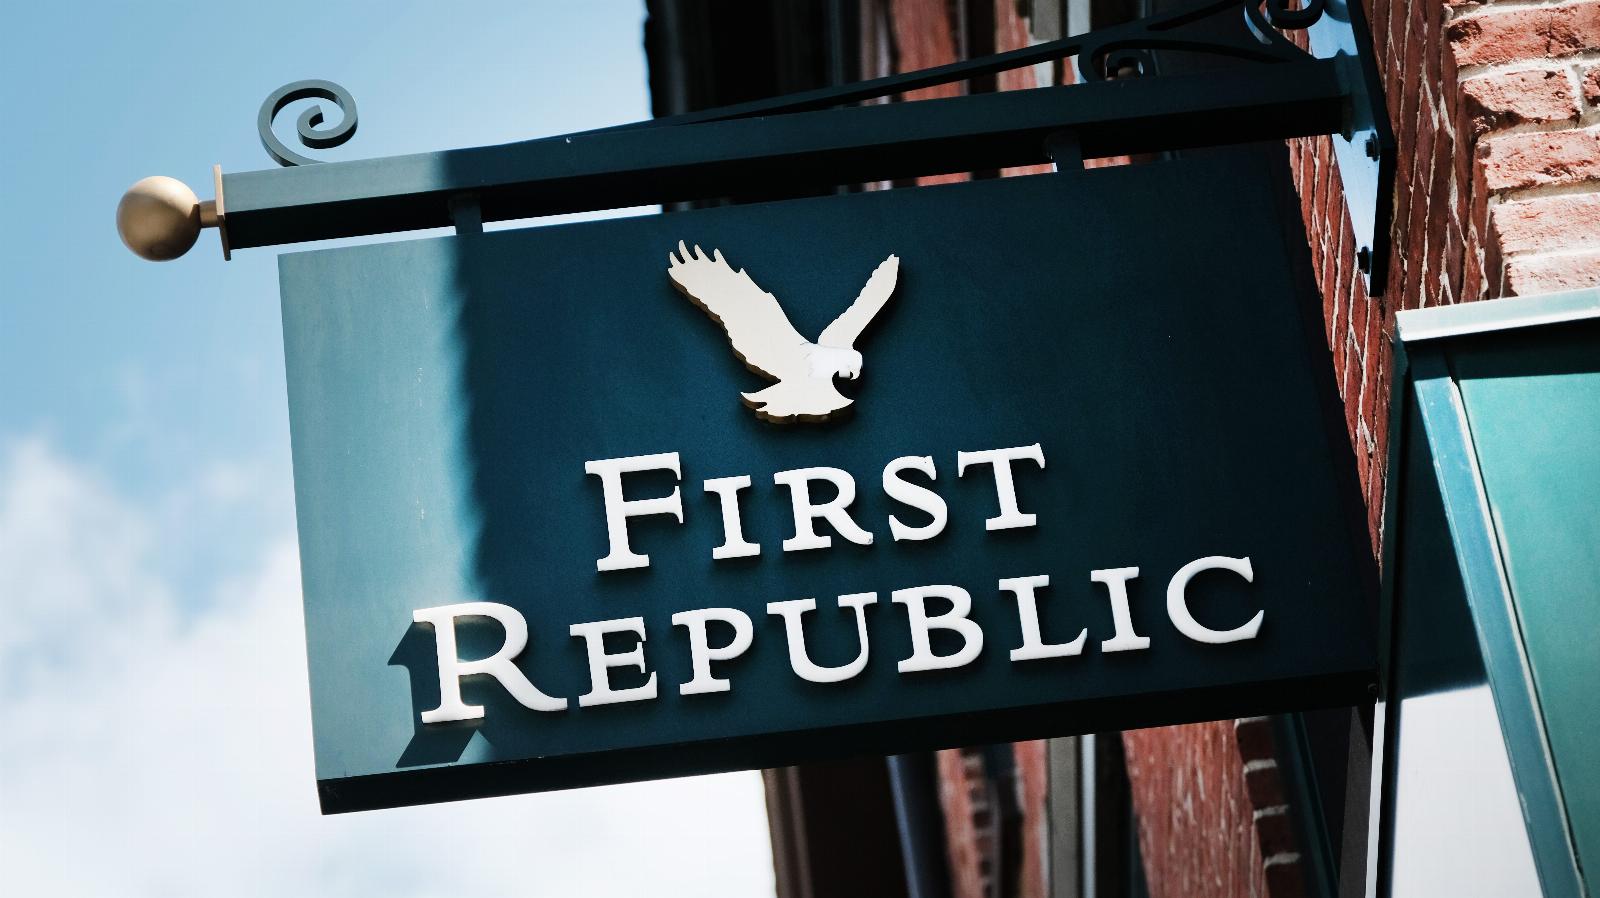 Regulators close First Republic Bank, JPMorgan named as the buyer of $330B assets and deposits, FDIC on the hook for $13B